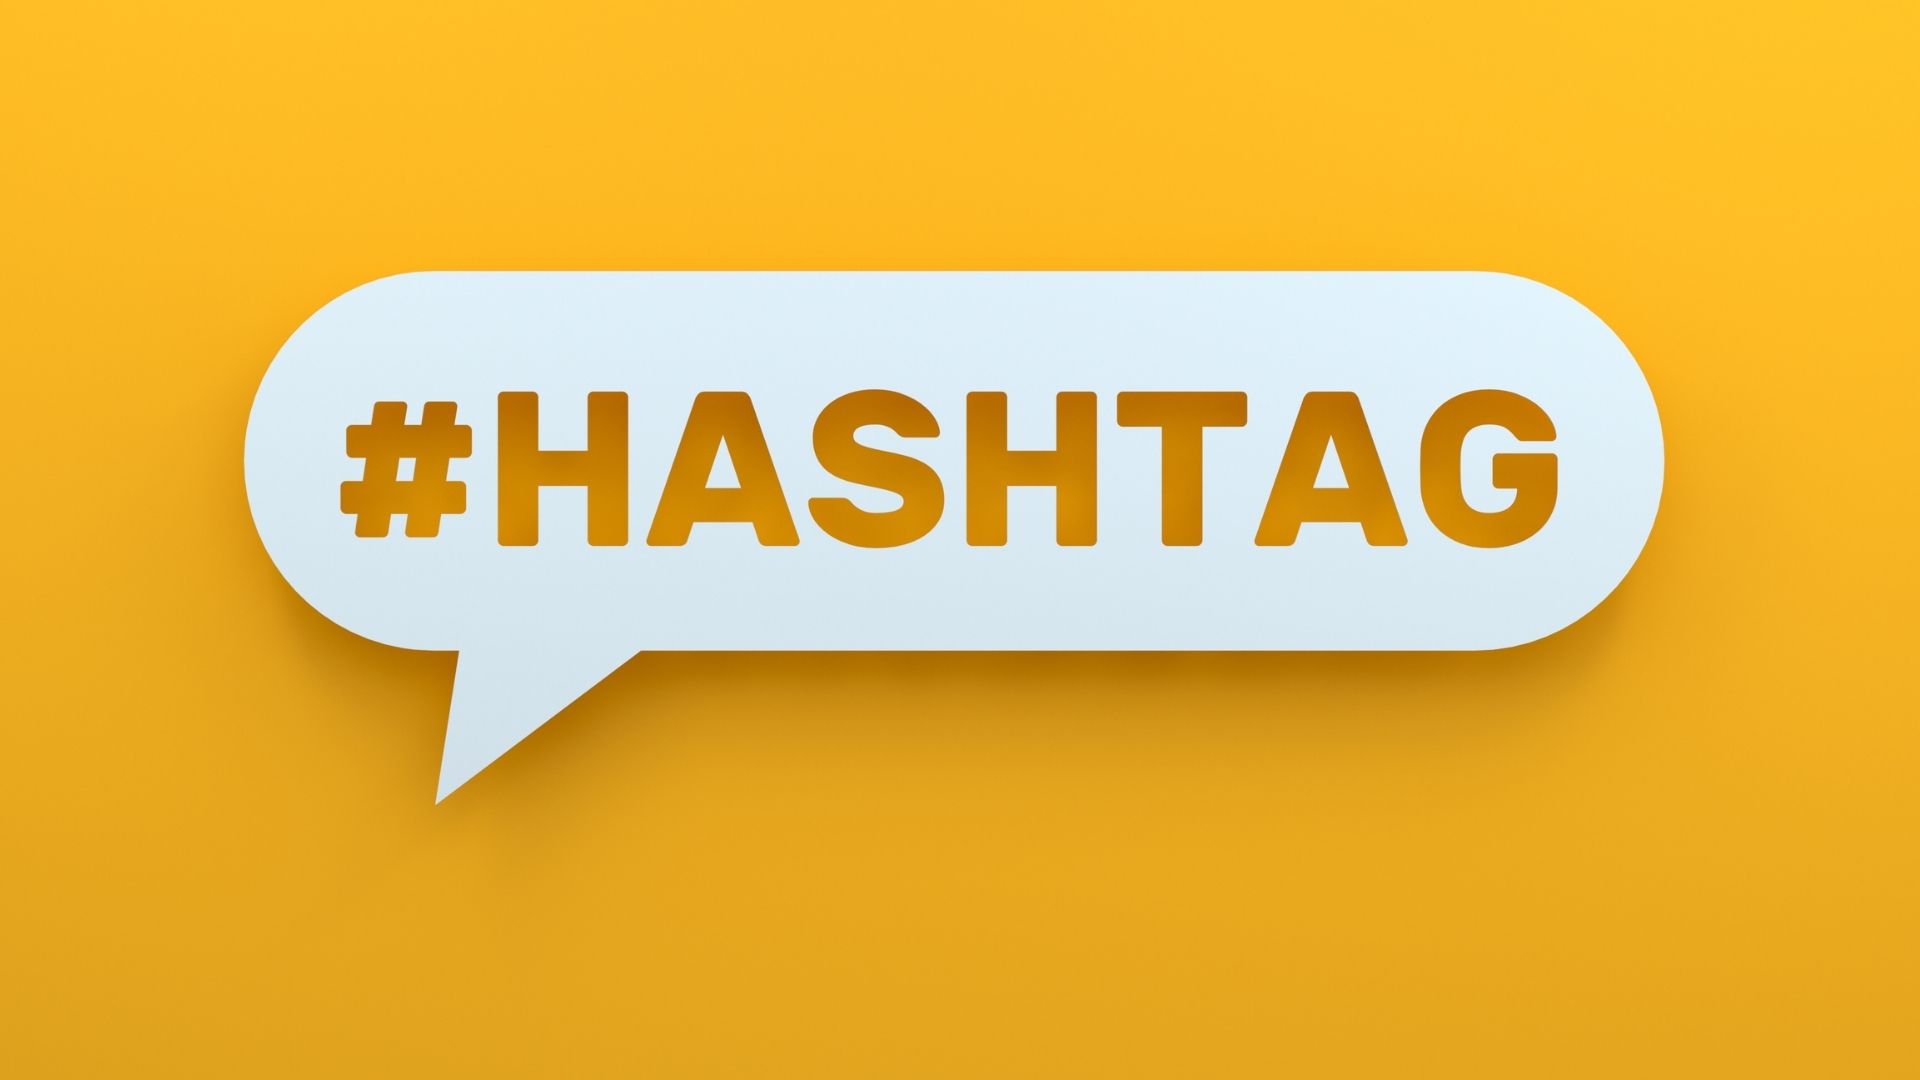 Hashtag text on yellow background